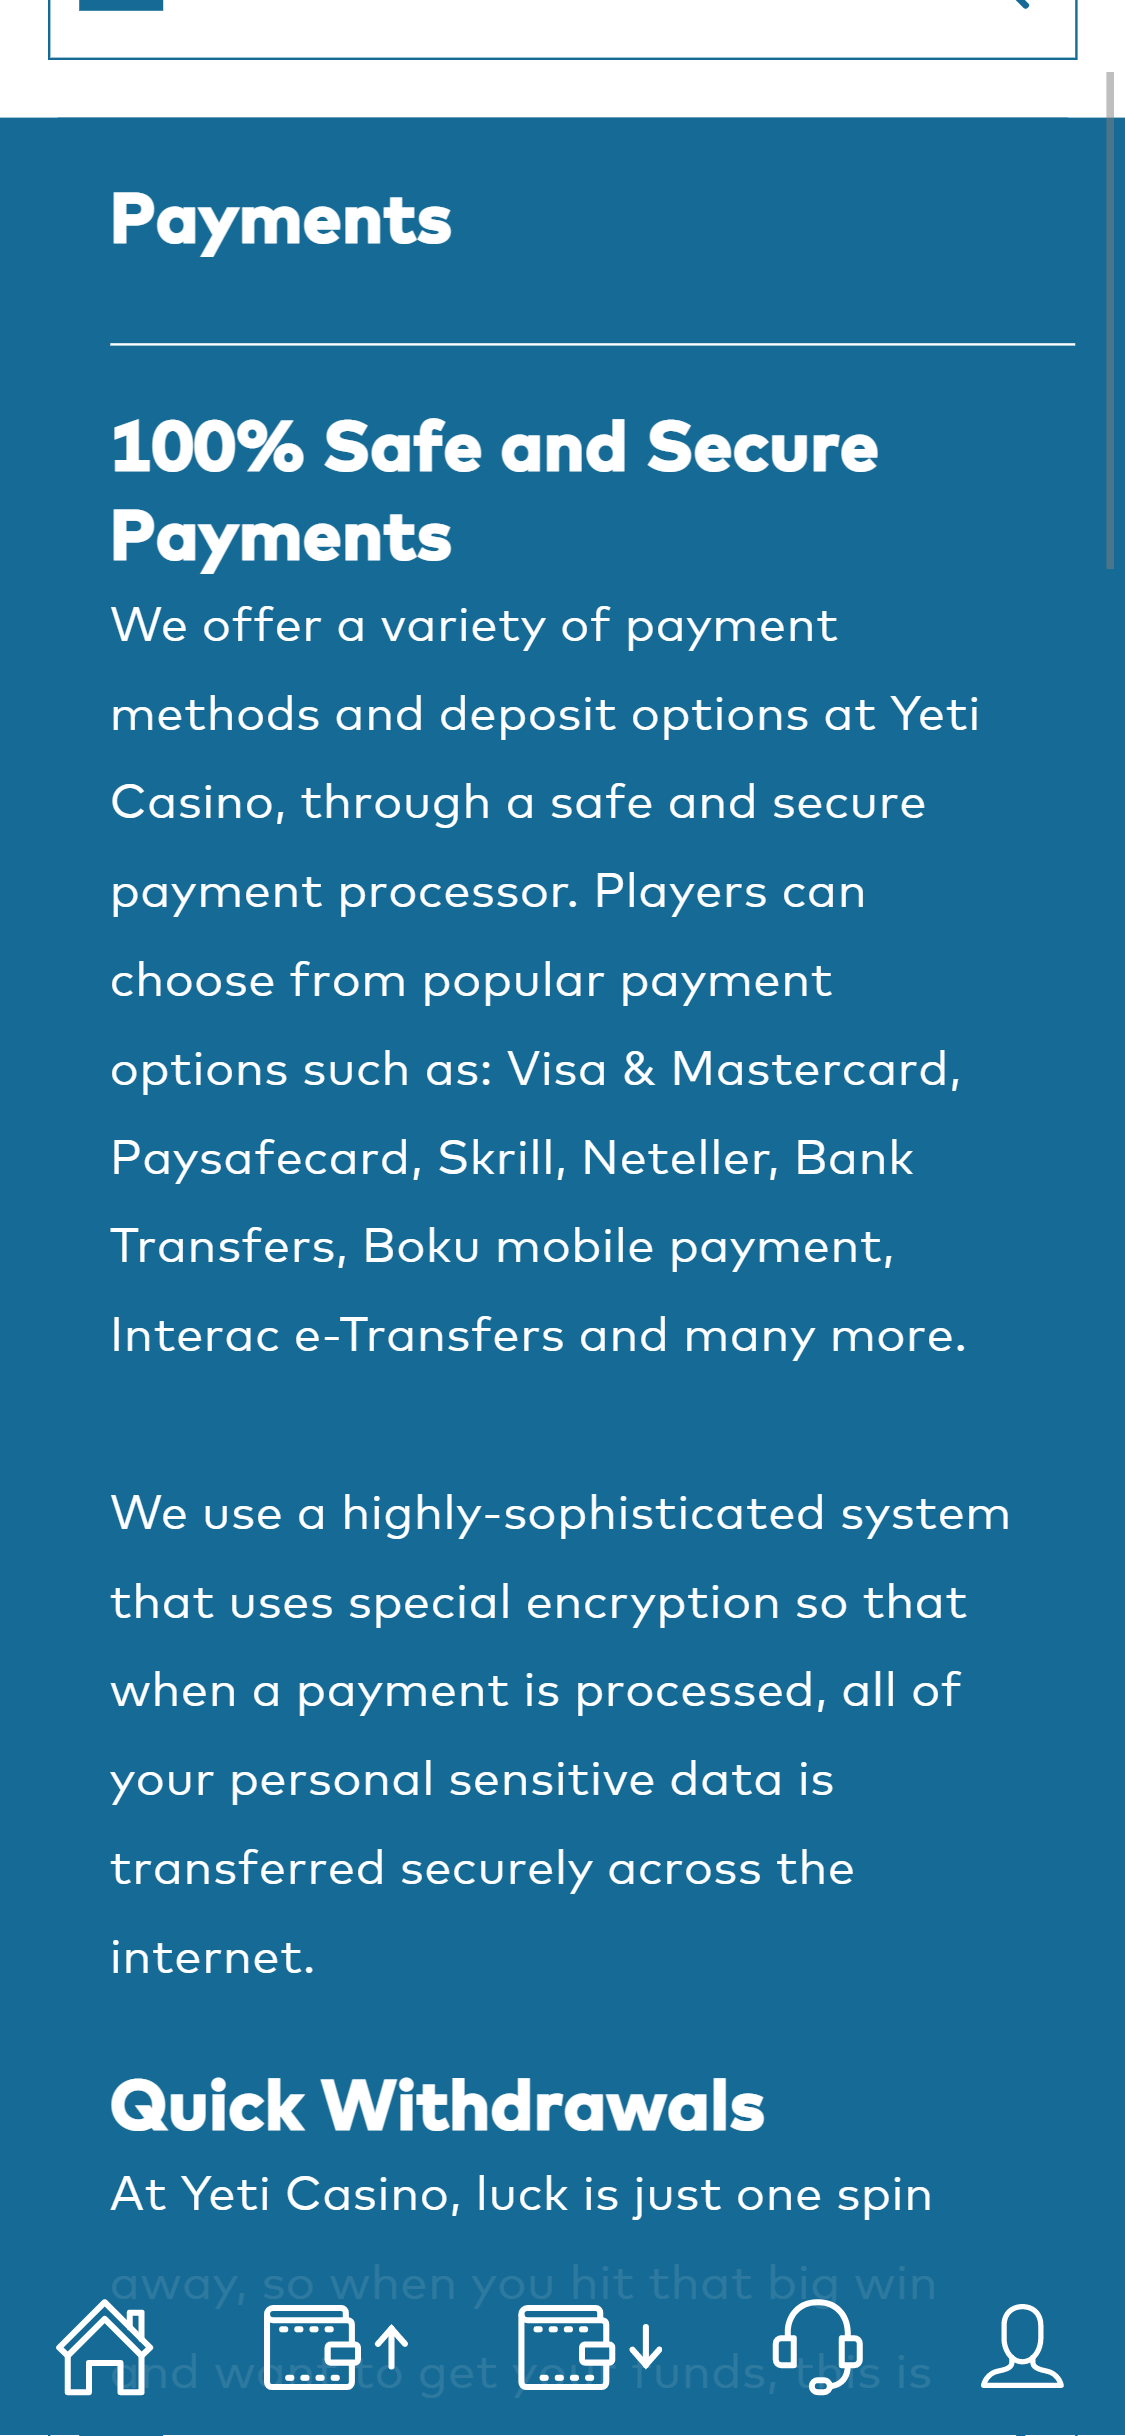 Yeti Casino Mobile Payment Methods Review